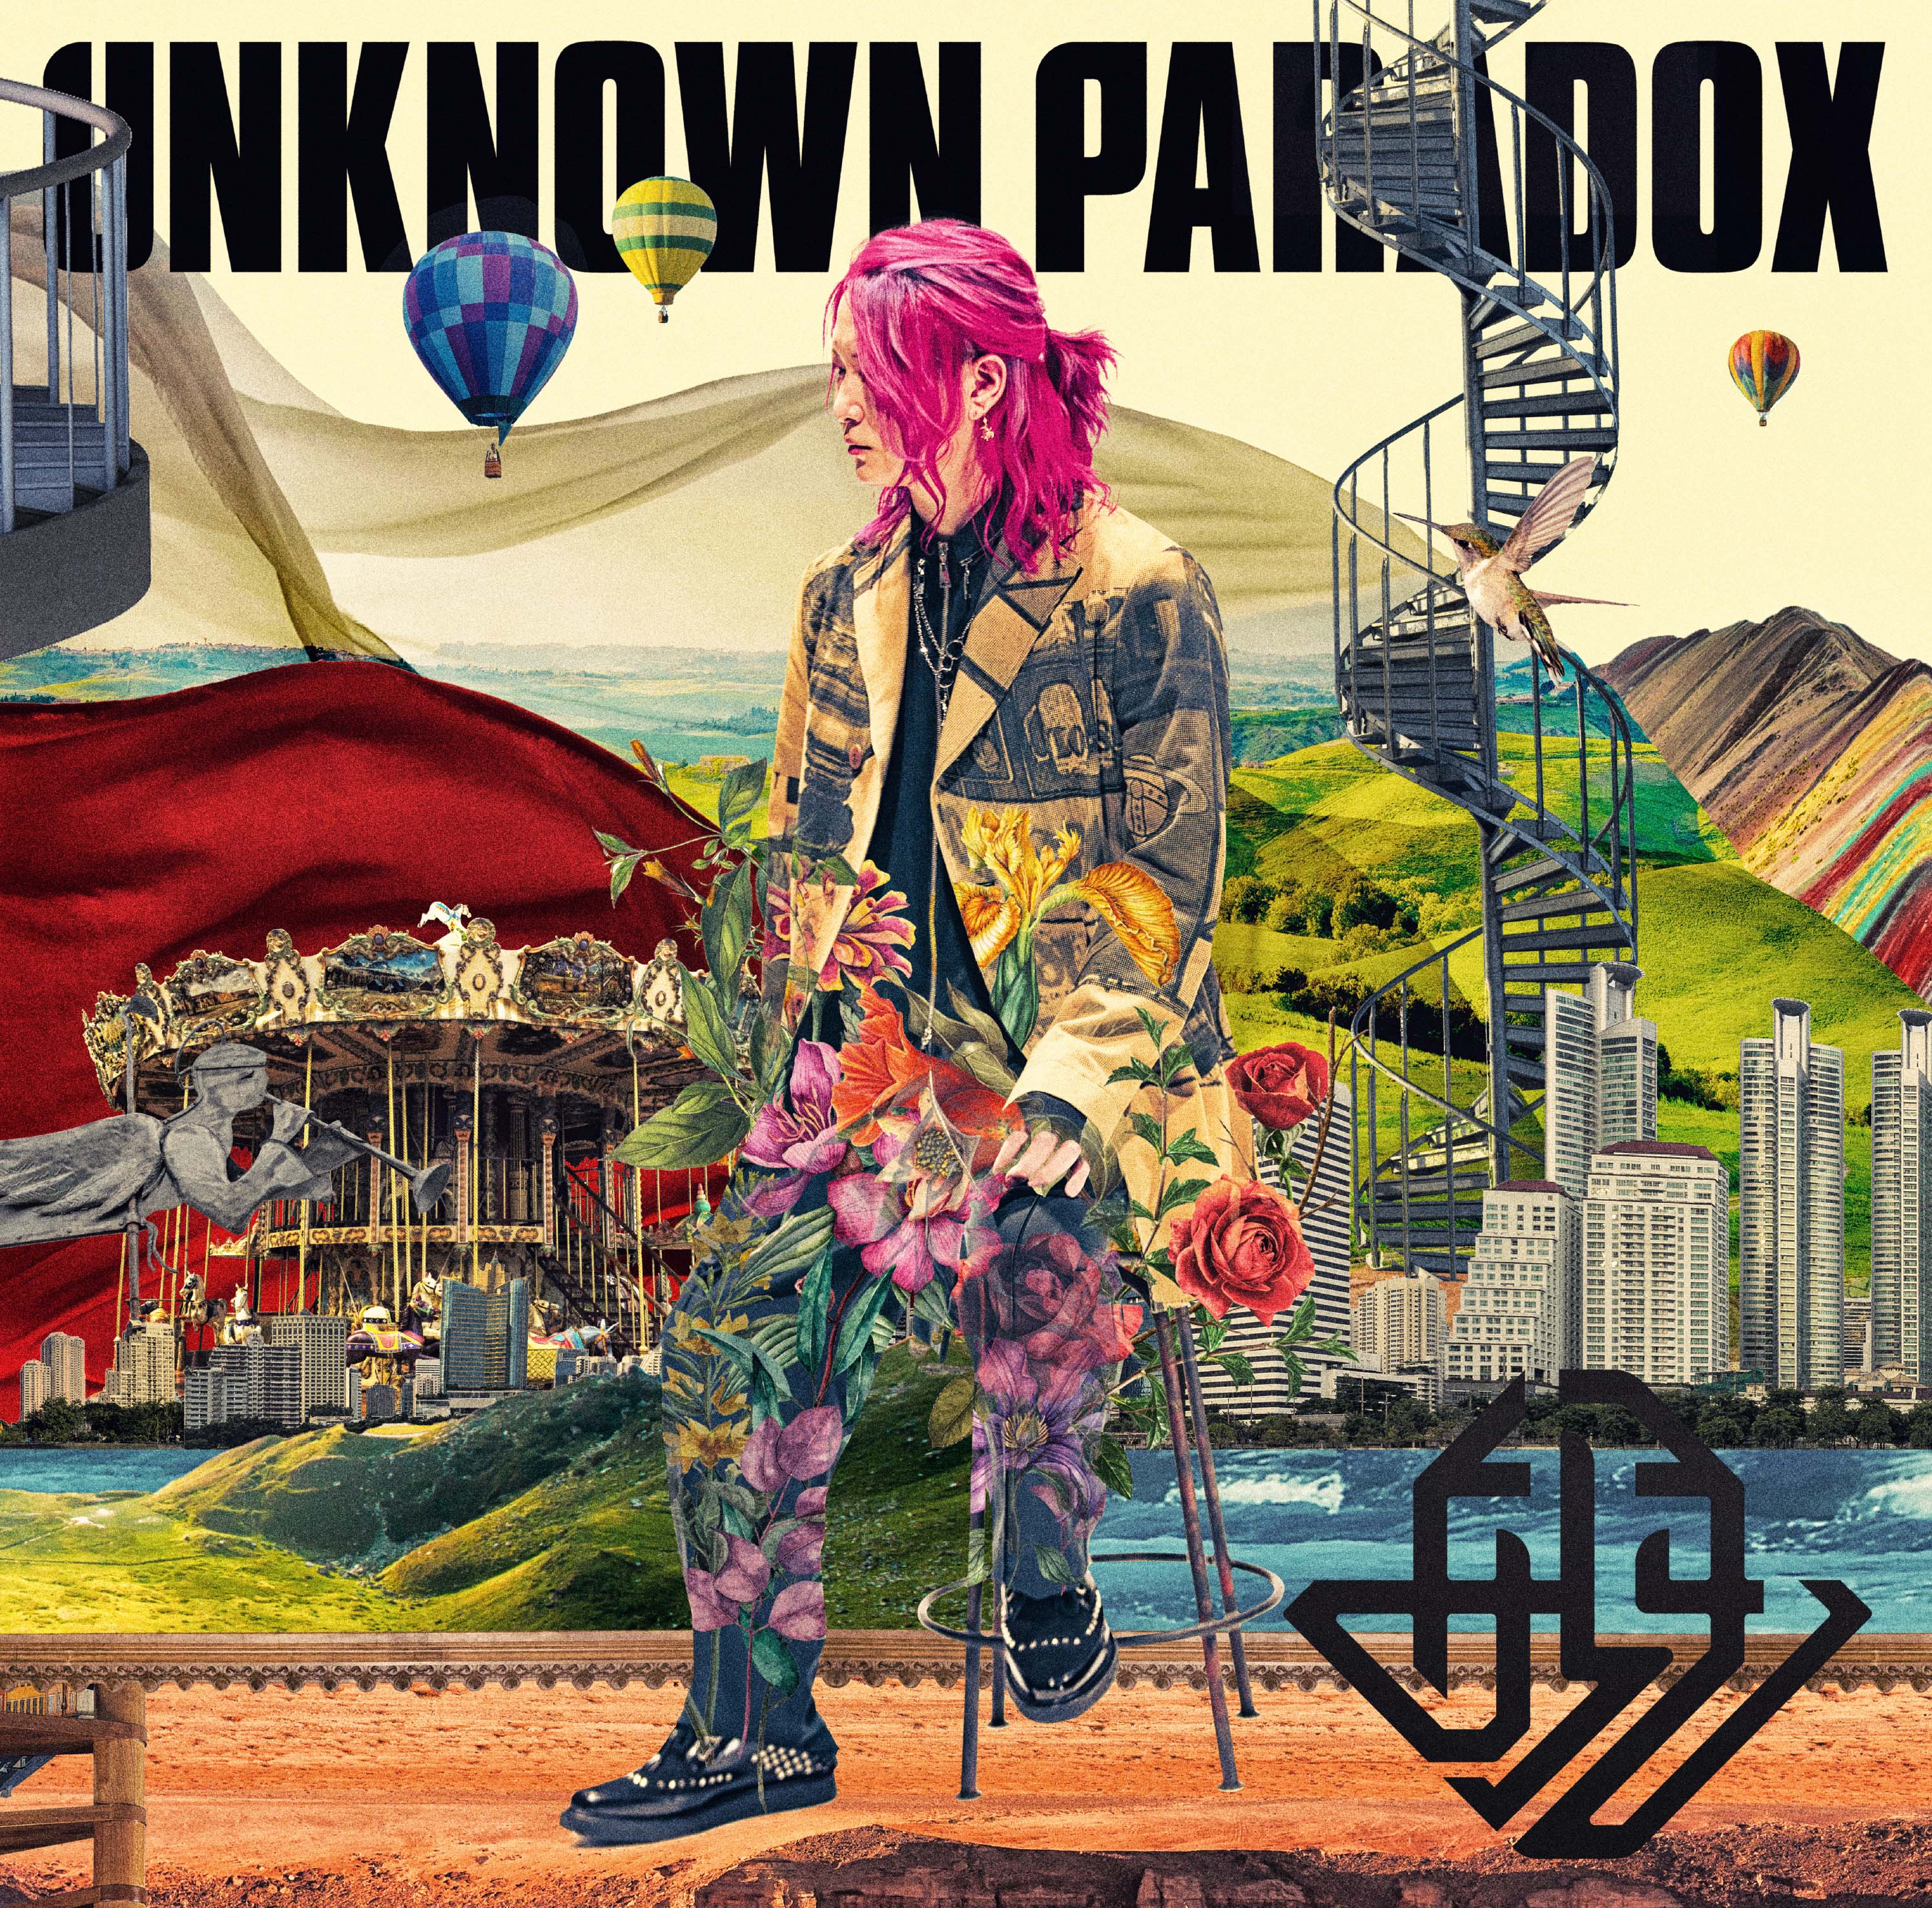 ARAKI "UNKNOWN PARADOX" Normal Edition (CD Only) Release on June 16th